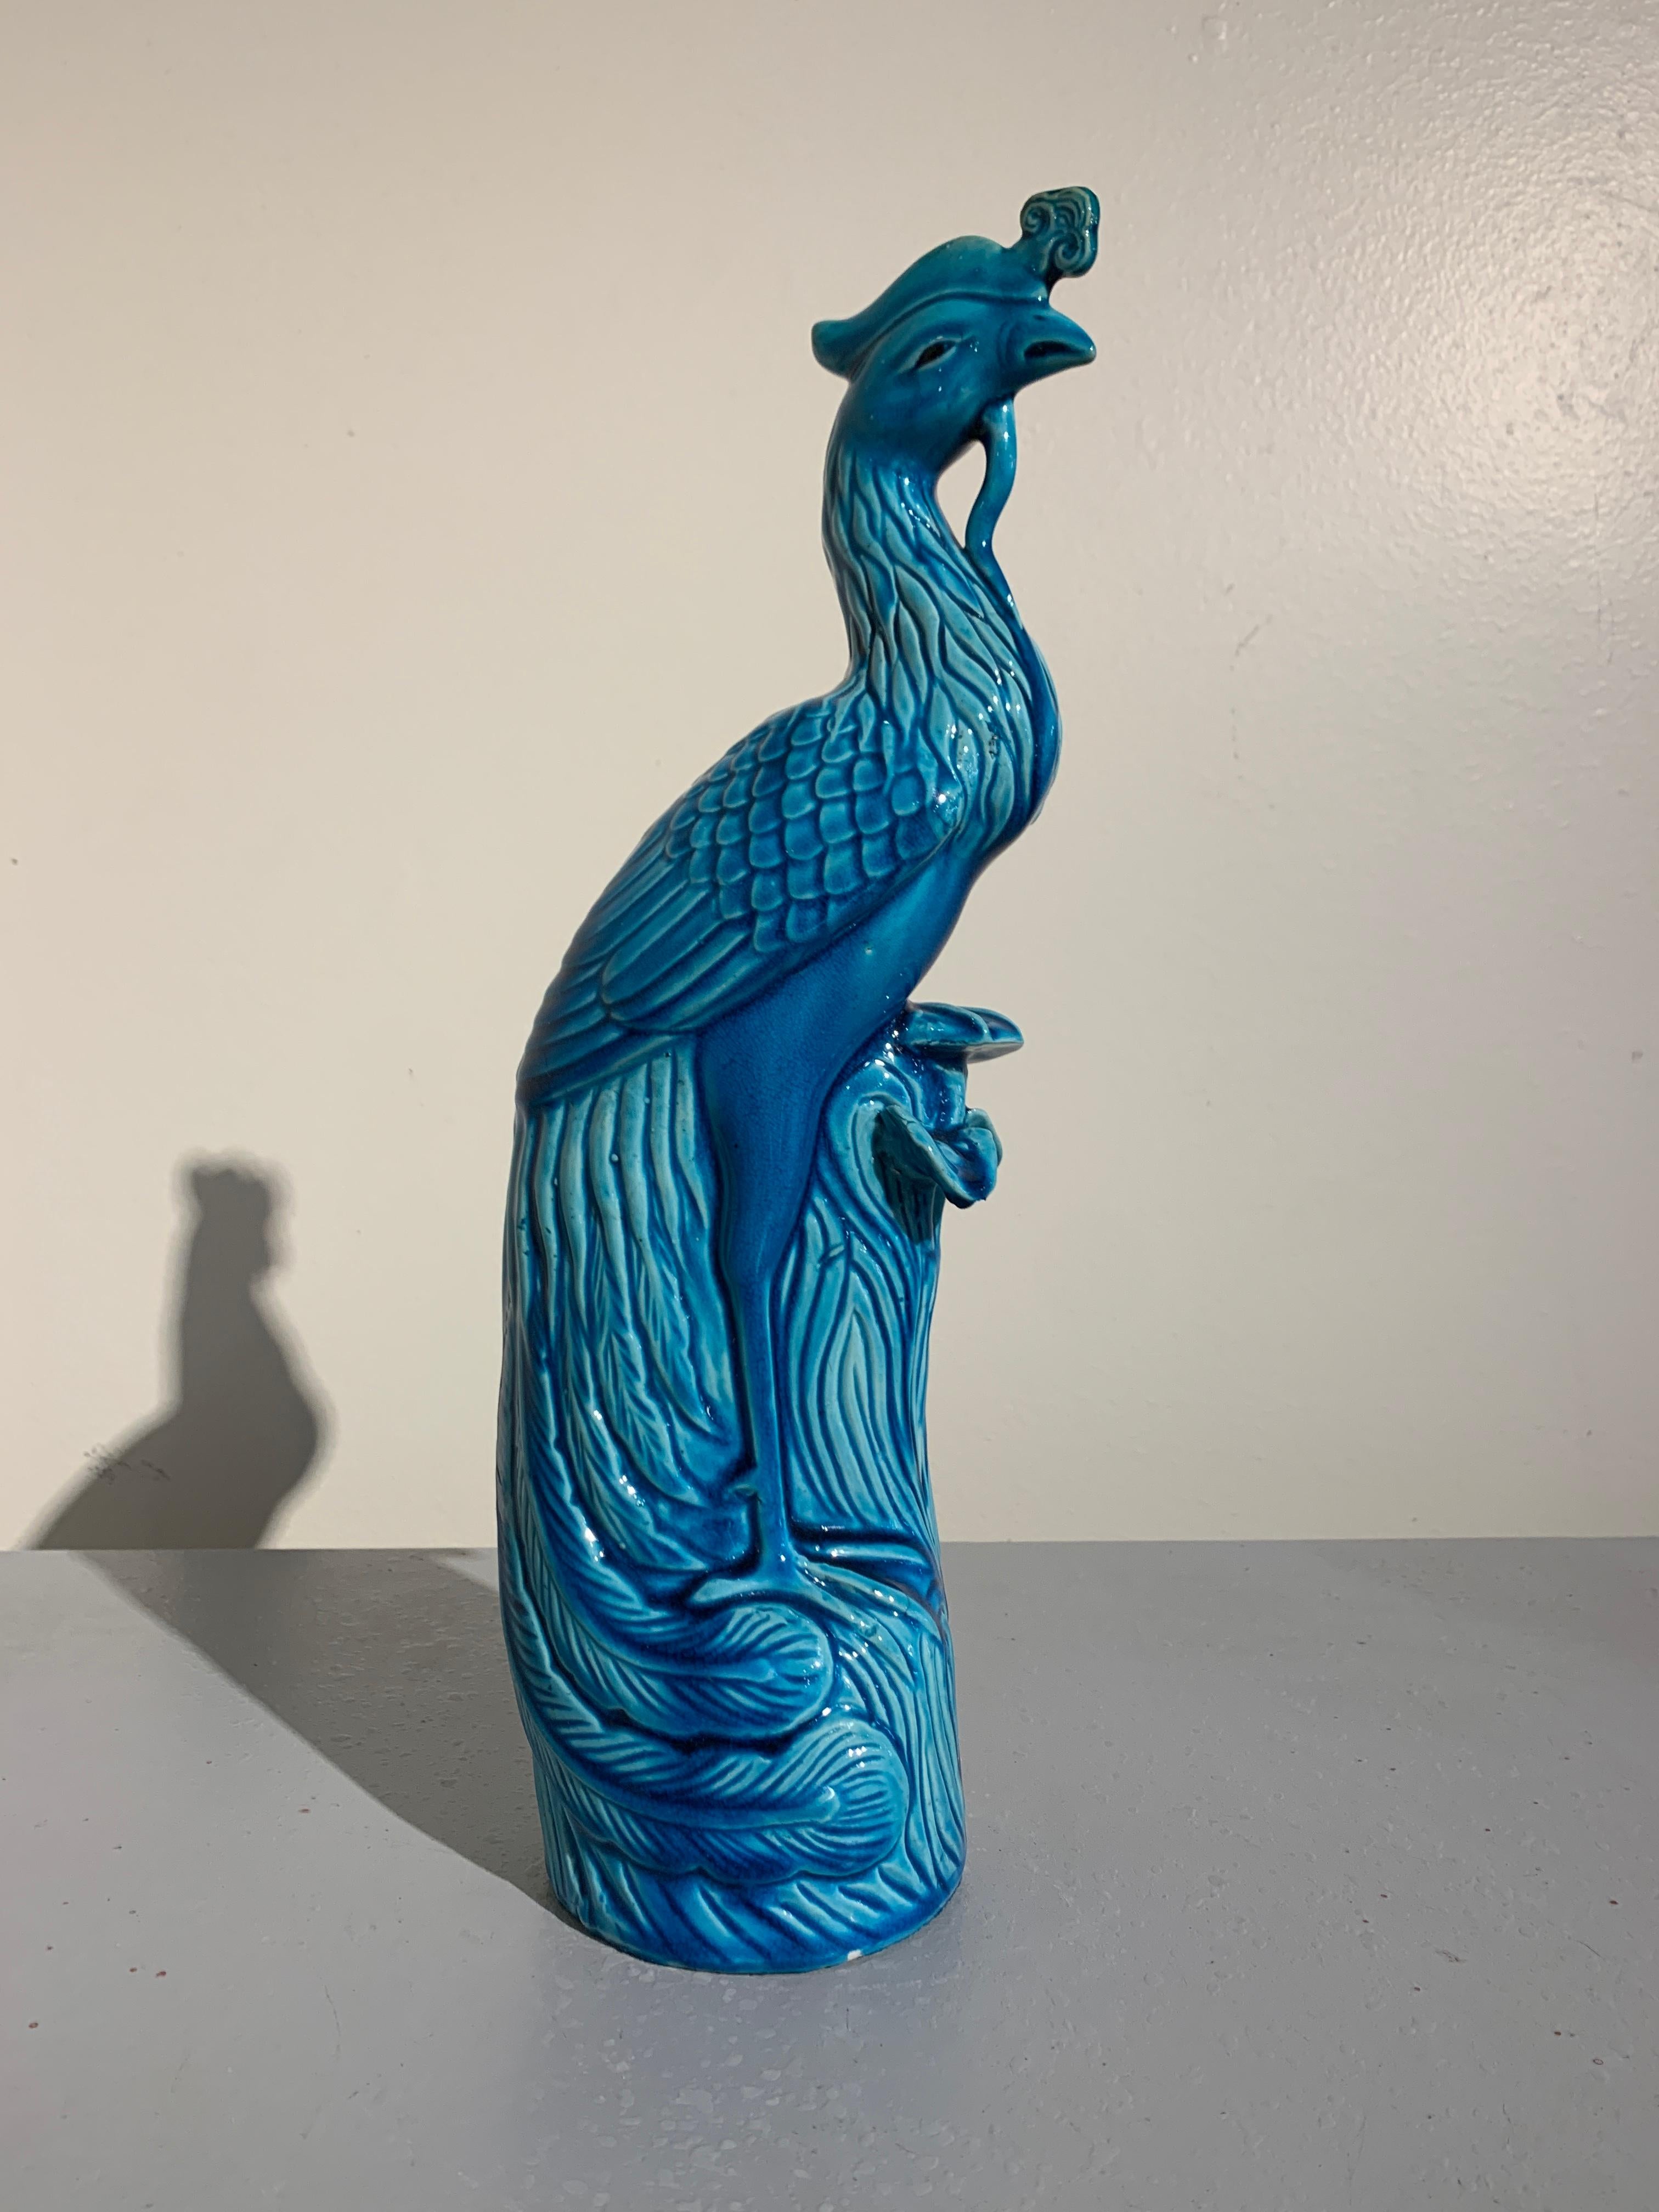 A stylish vintage Chinese Hollywood Regency turquoise glazed porcelain phoenix, mid-20th century, China.

The phoenix, called a fenghua in Chinese, is portrayed perched on a rocky outcrop, large wings folded against its body, its tail sweeping out